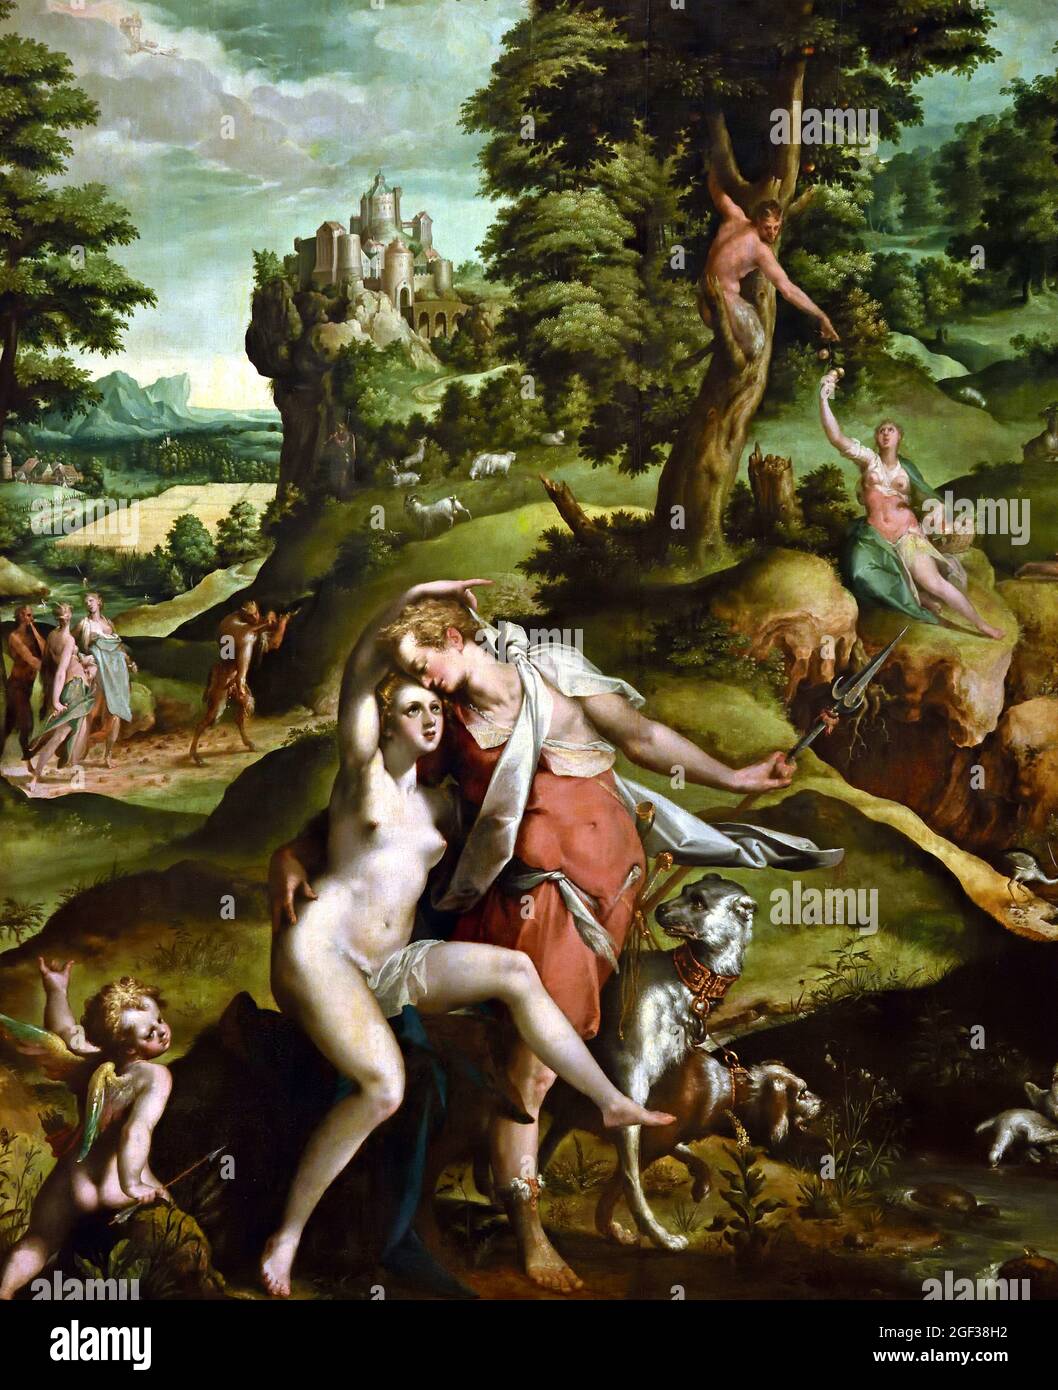 Venus en Adonis, Bartholomeus Spranger 1546-1611 Flemish Belgian Belgium ( Venus, the goddess of love, does not want to let her lover Adonis go hunting. She is afraid that something will happen to him. Her fear comes true: a wild boar kills Adonis. The tall slender figures with small heads are characteristic of Spranger's elegant Mannerist style. The landscape is remarkably old-fashioned: it has been copied from an early 16th-century painting. ) Stock Photo